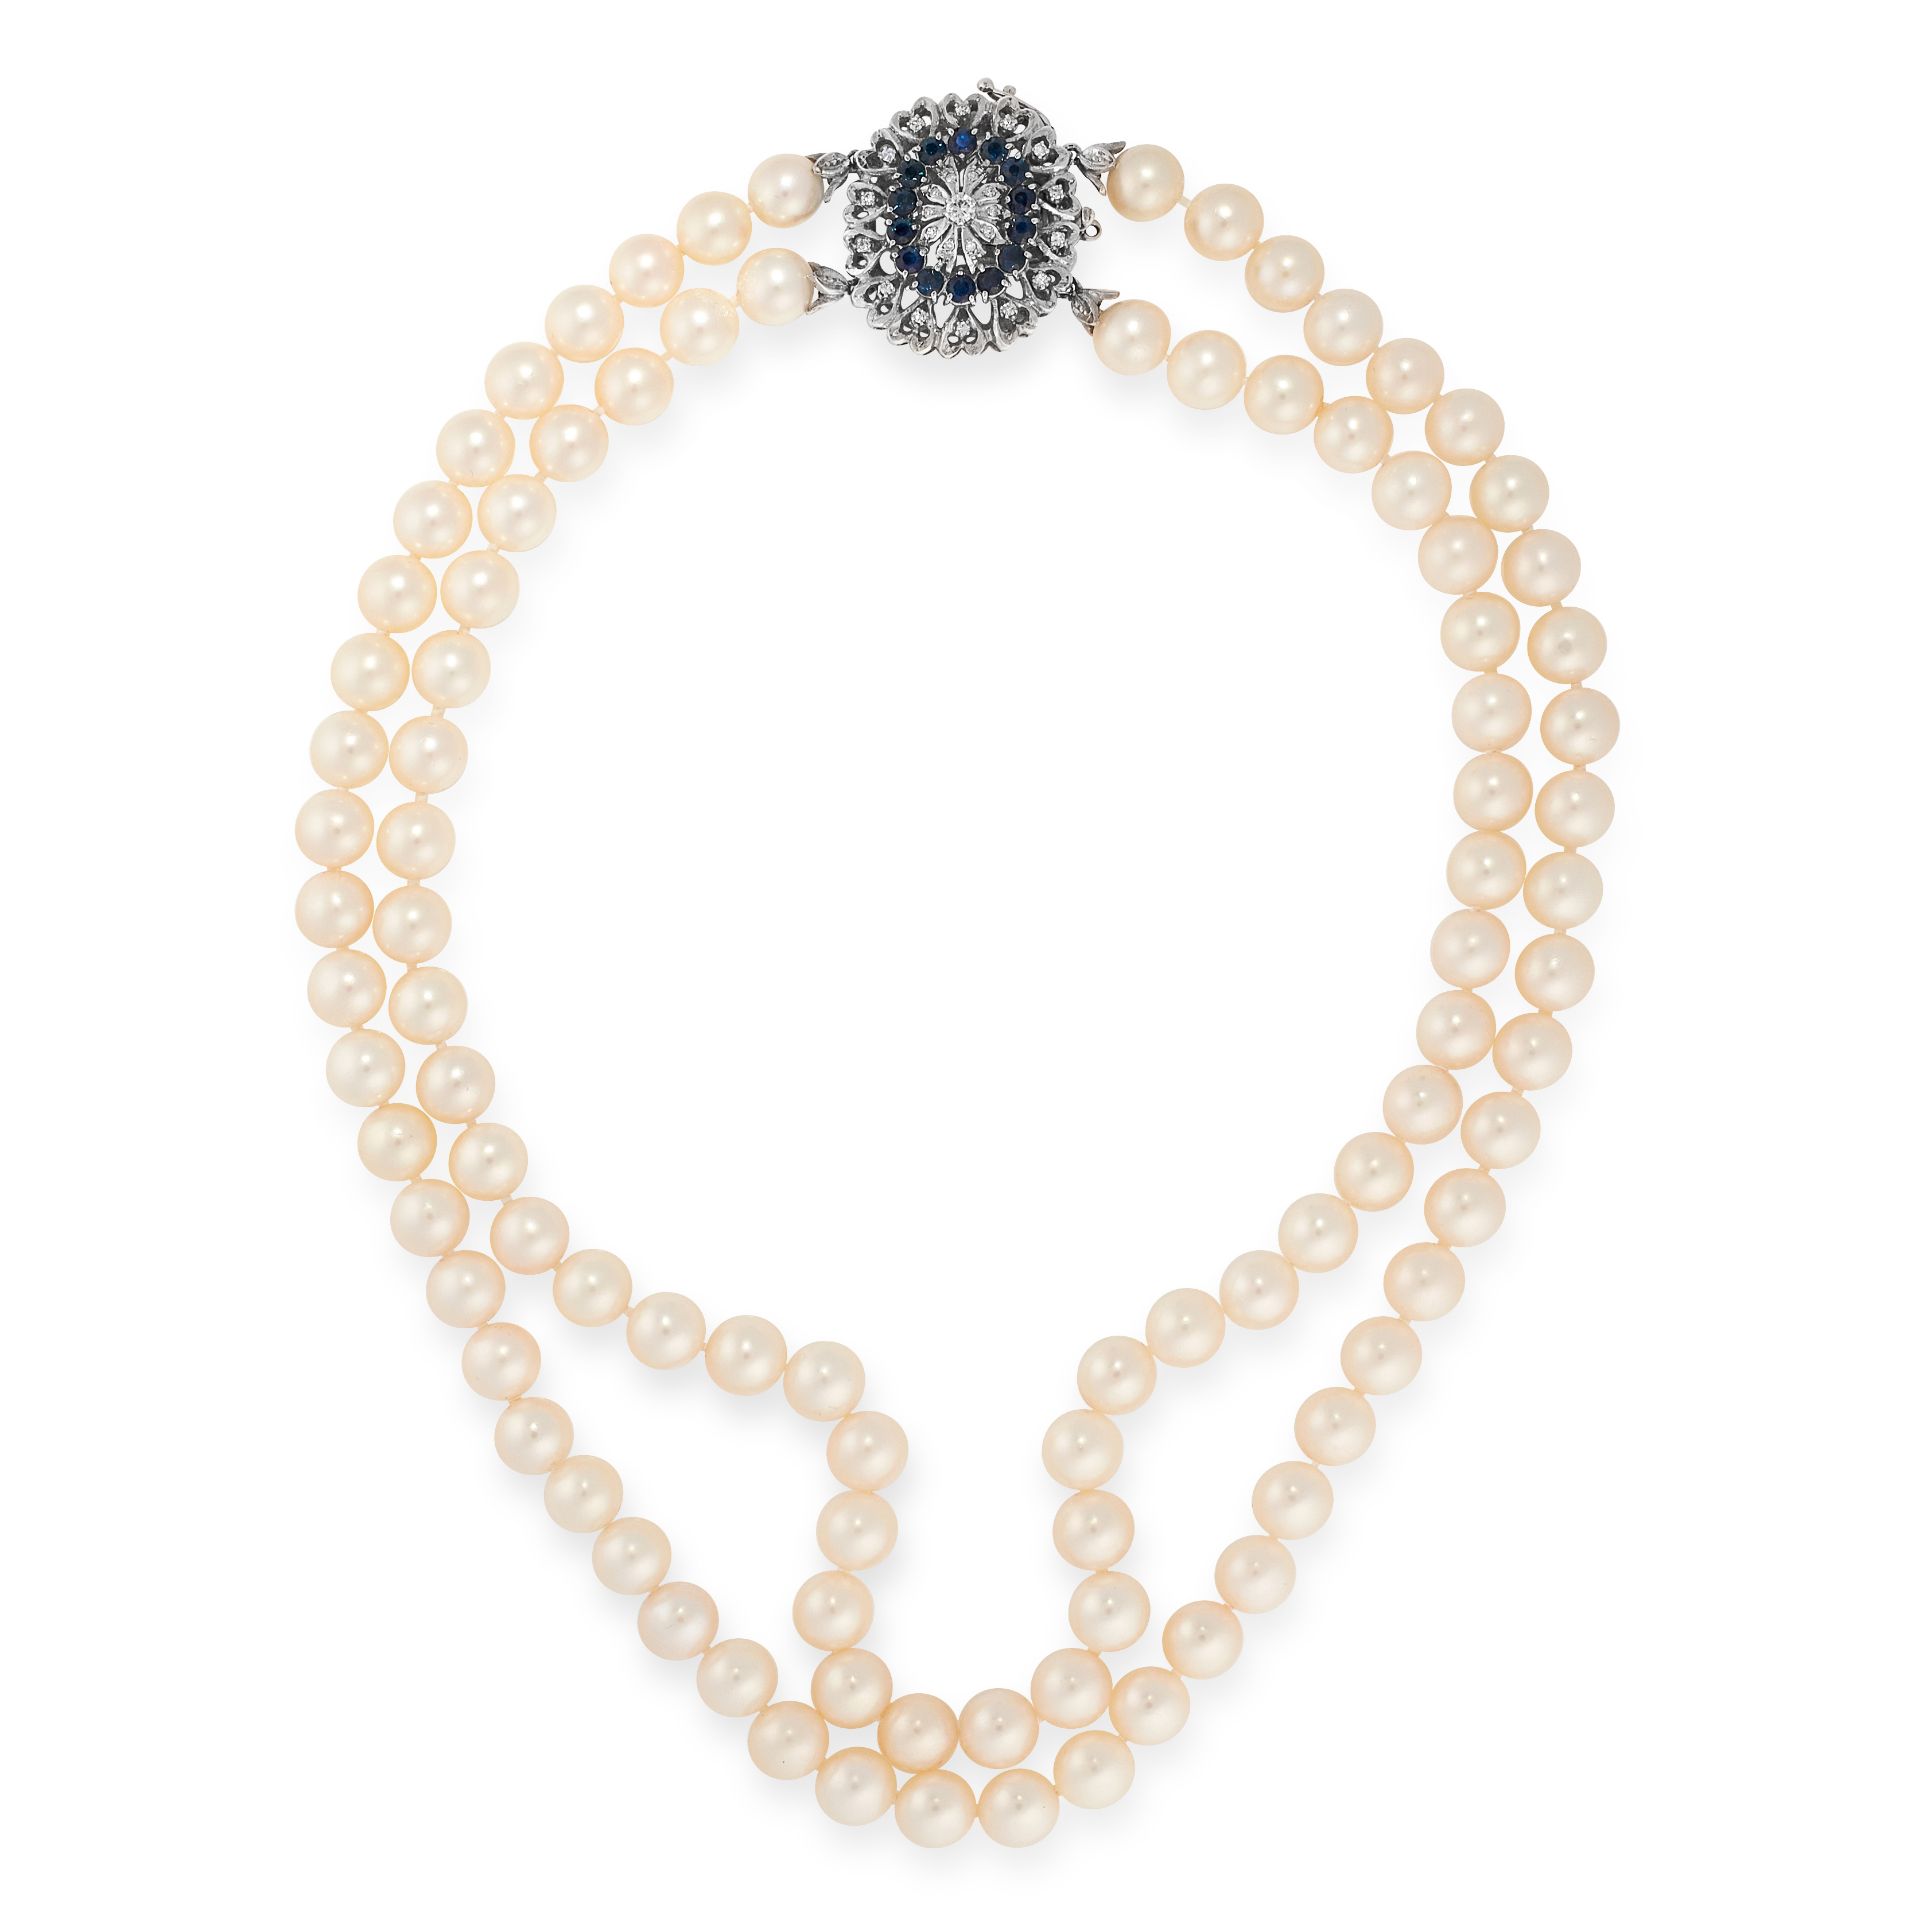 A PEARL, SAPPHIRE AND DIAMOND NECKLACE in 18ct white gold, comprising two rows of pearls of 8.3mm,